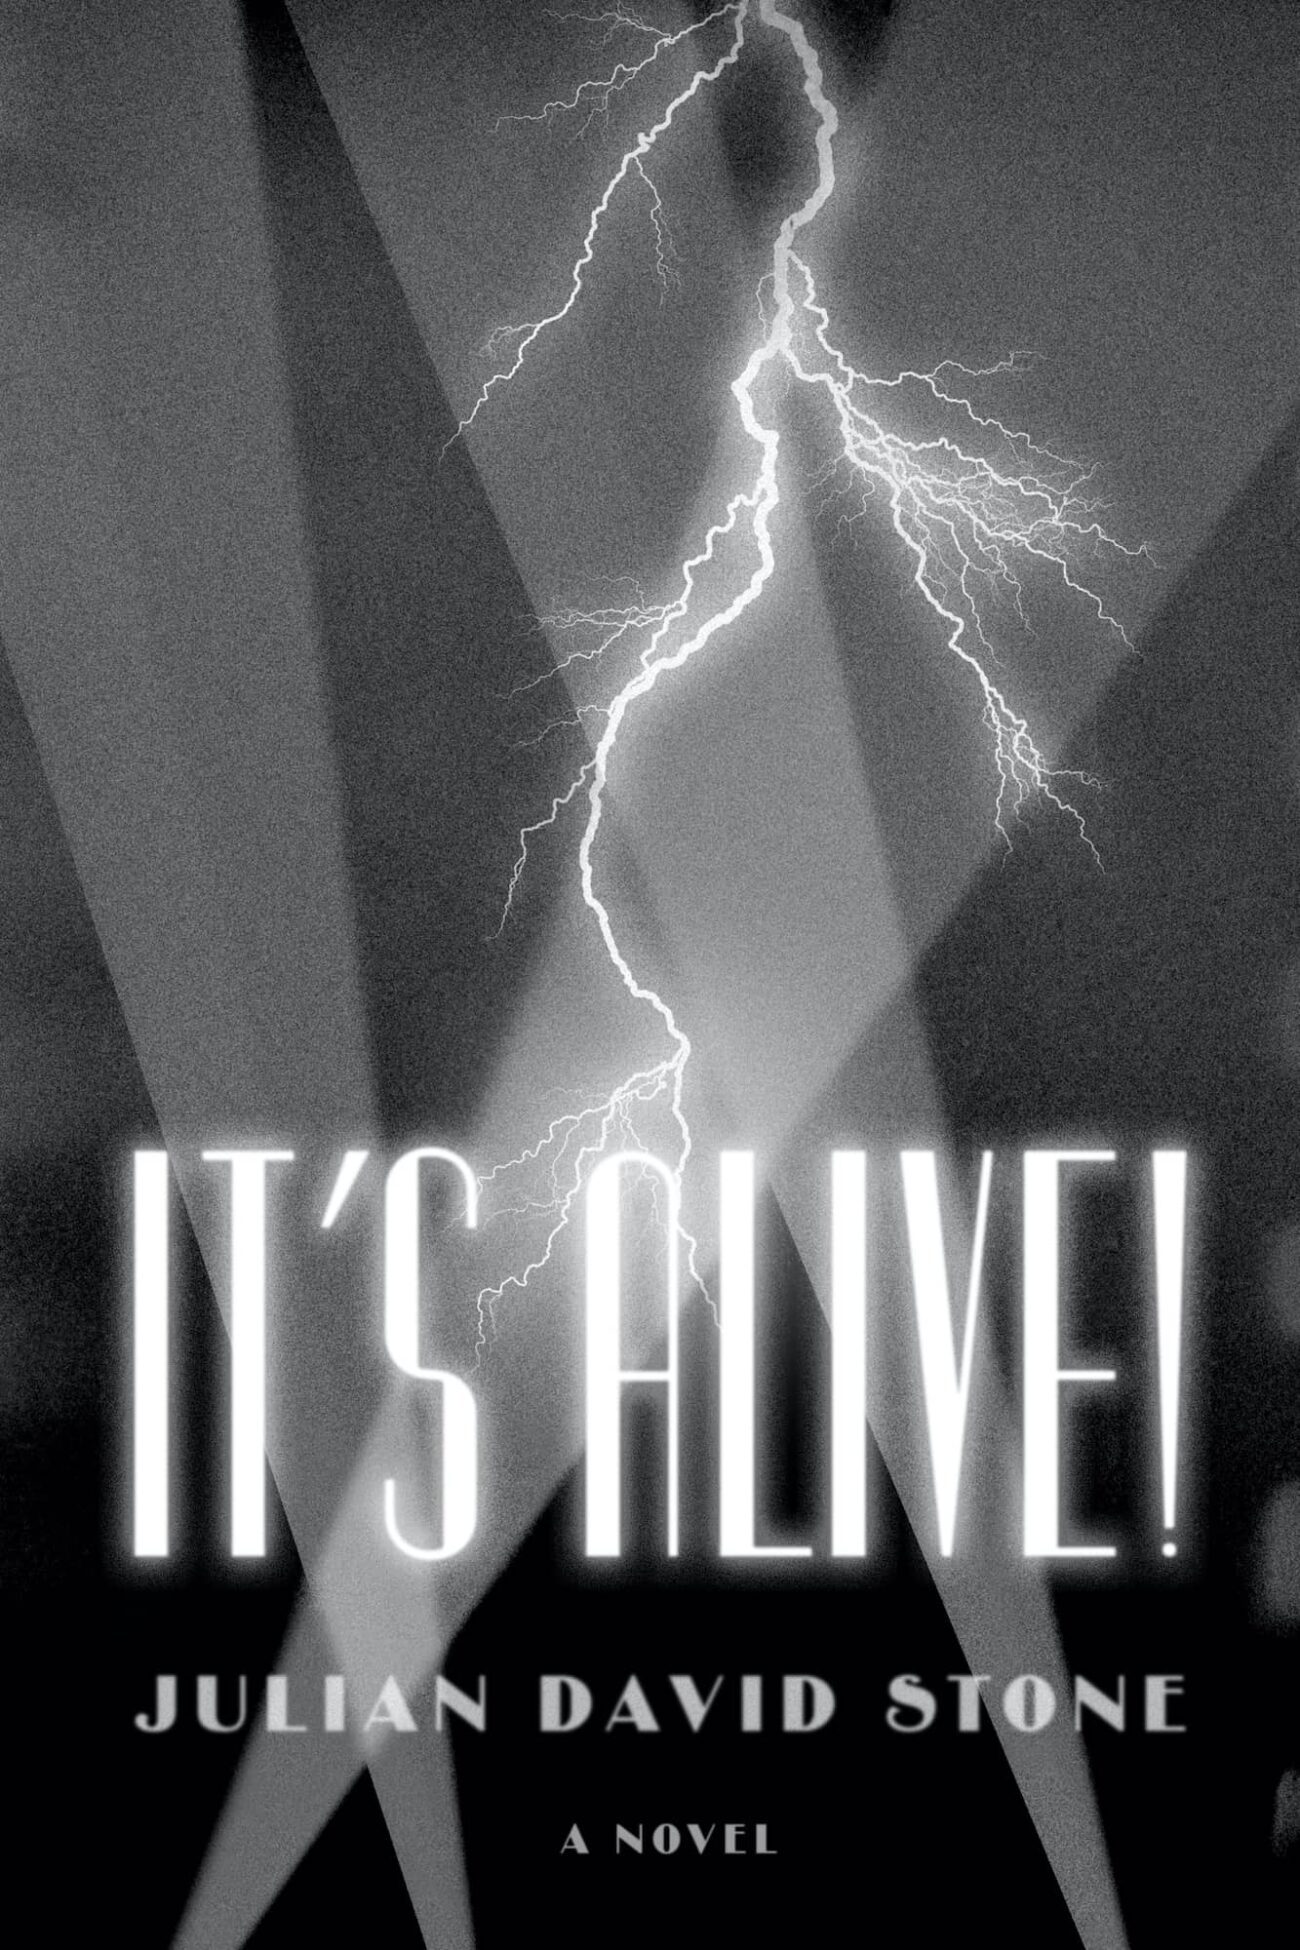 Julian David Stone's newest novel travels back to the production of 1931's 'Frankenstein' for serious drama. Get hyped for 'It's Alive' today.